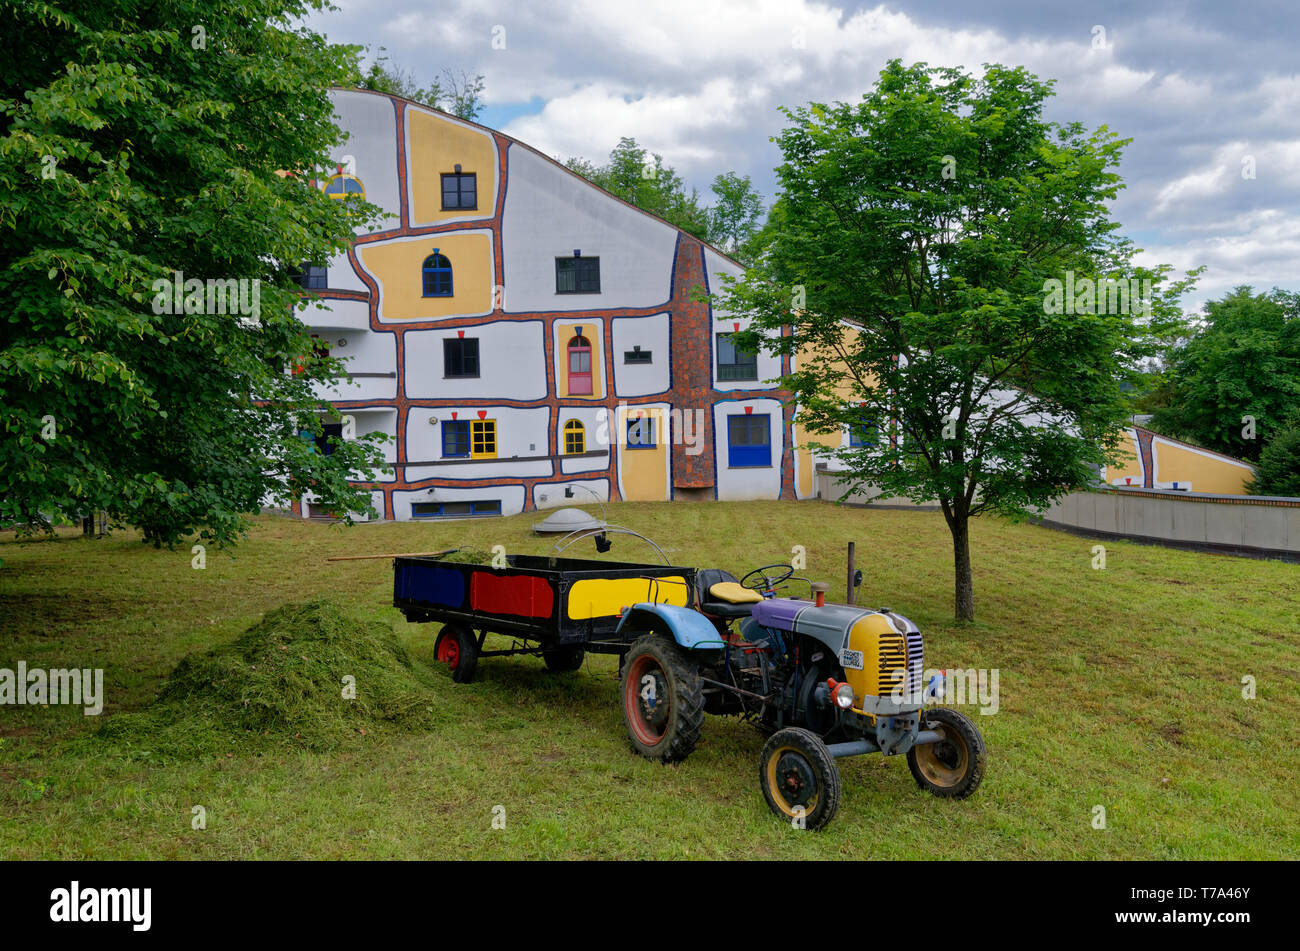 Colourful painted tractor and grass clippings in front of building at Rogner Bad Blumau, a resort or spa hotel designed by Friedensreich Hundertwasser Stock Photo